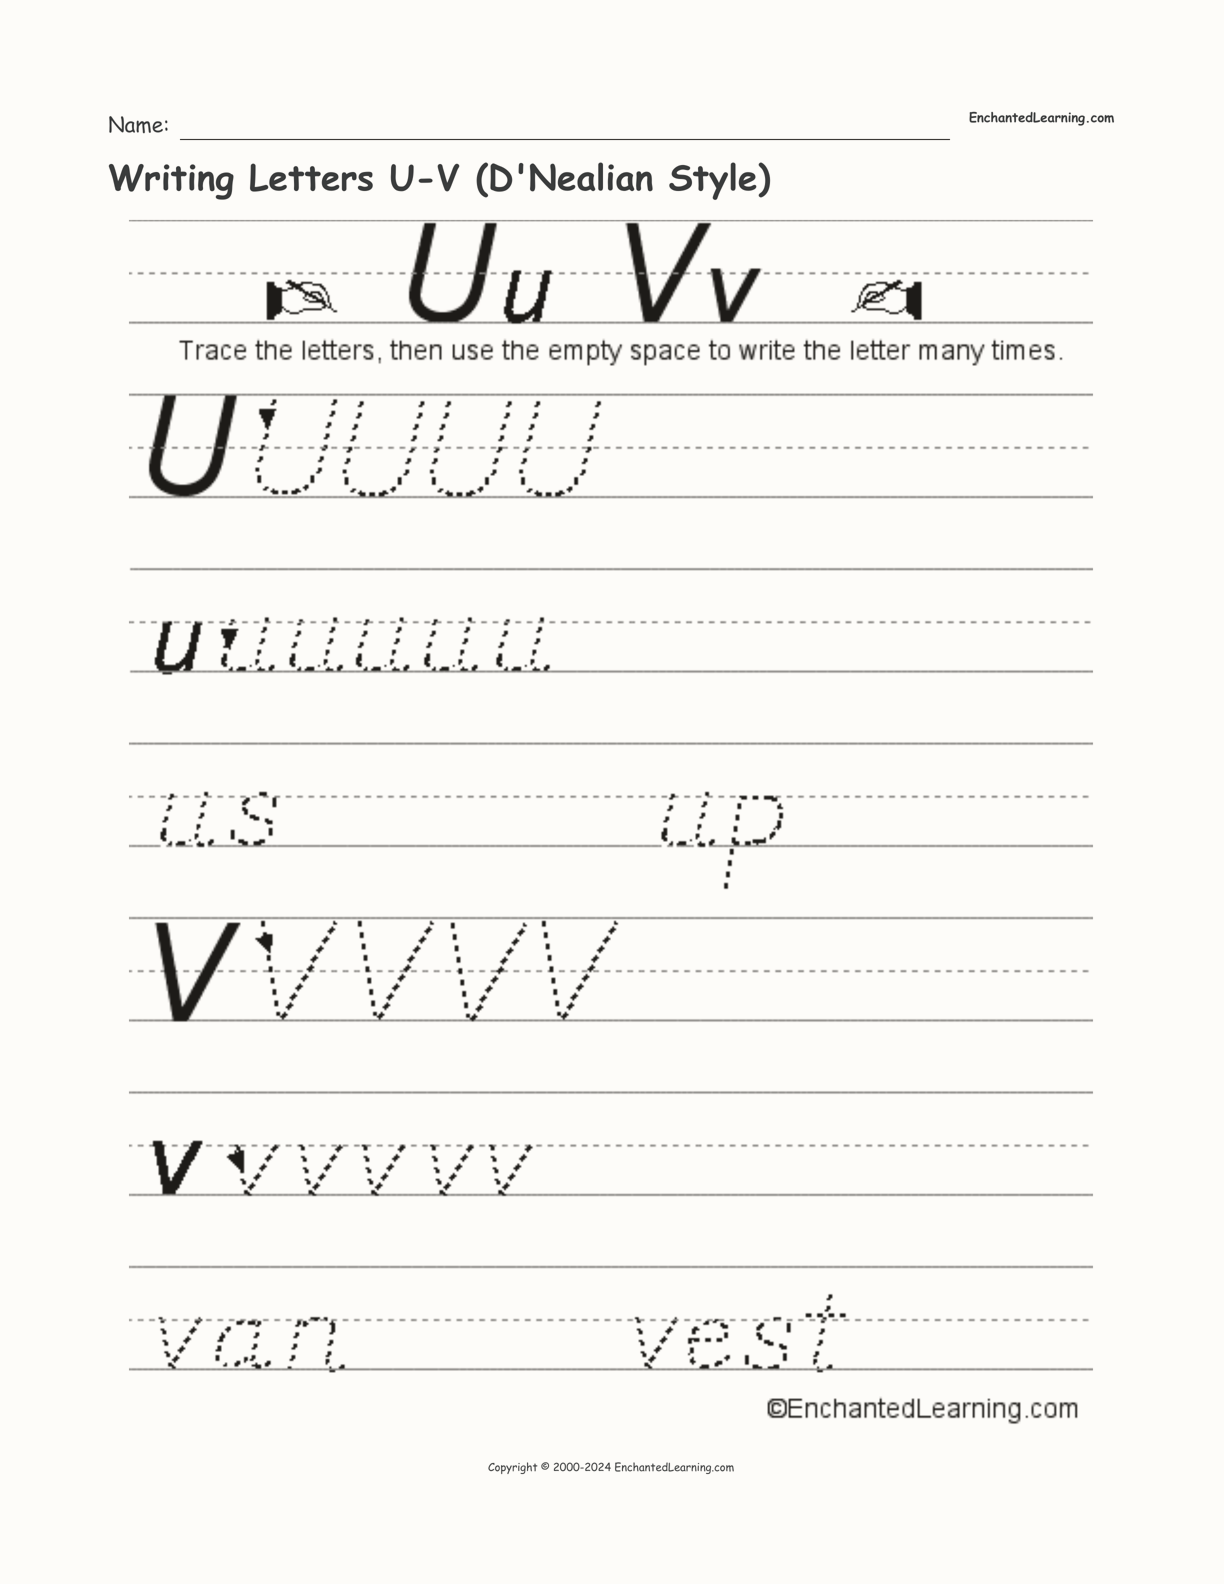 Writing Letters U-V (D'Nealian Style) interactive worksheet page 1